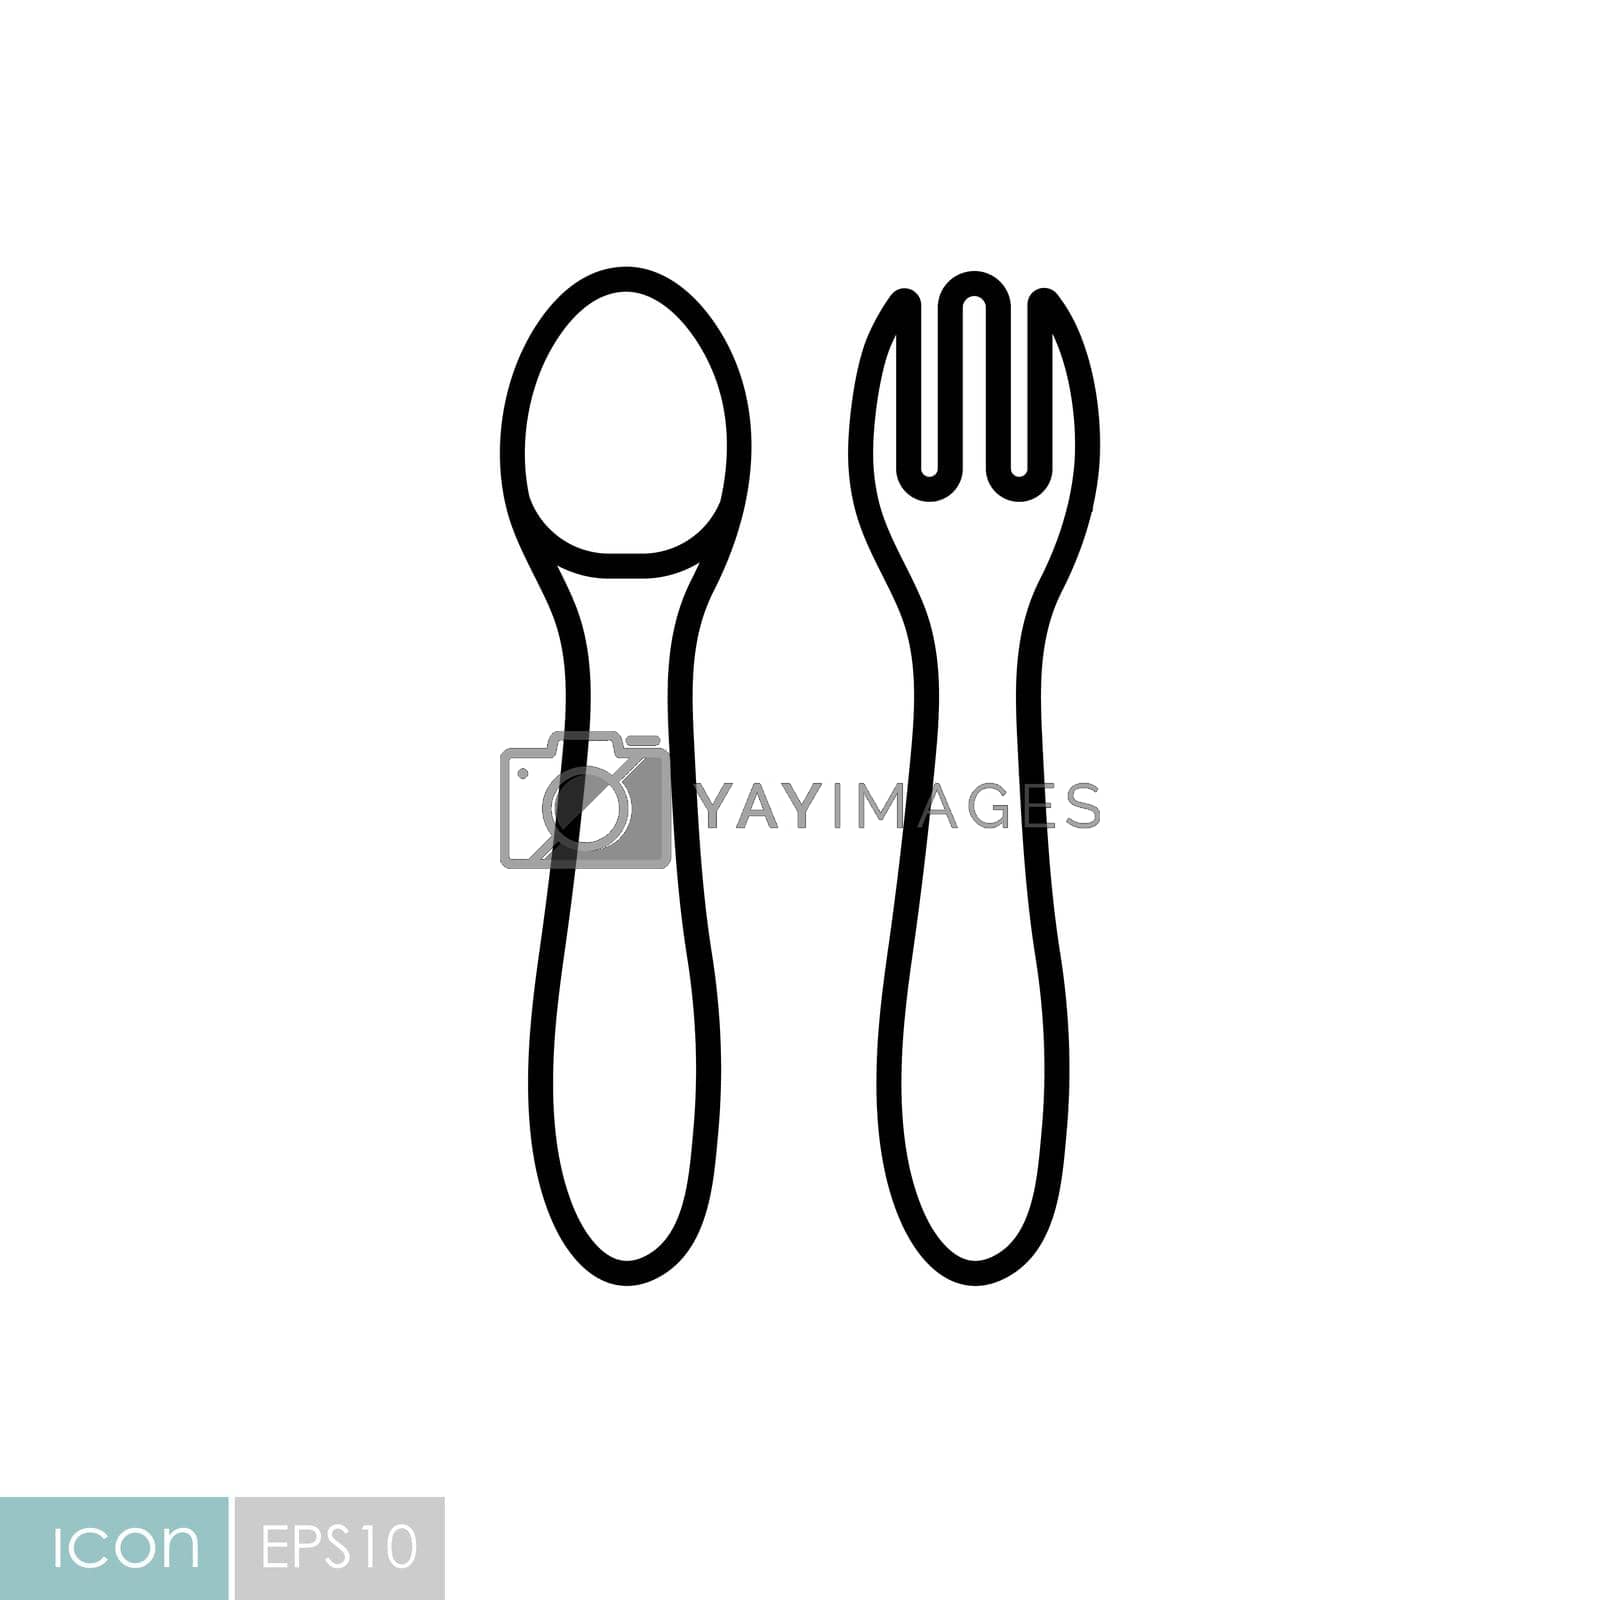 Spoon and fork for baby vector icon. Graph symbol for children and newborn babies web site and apps design, logo, app, UI